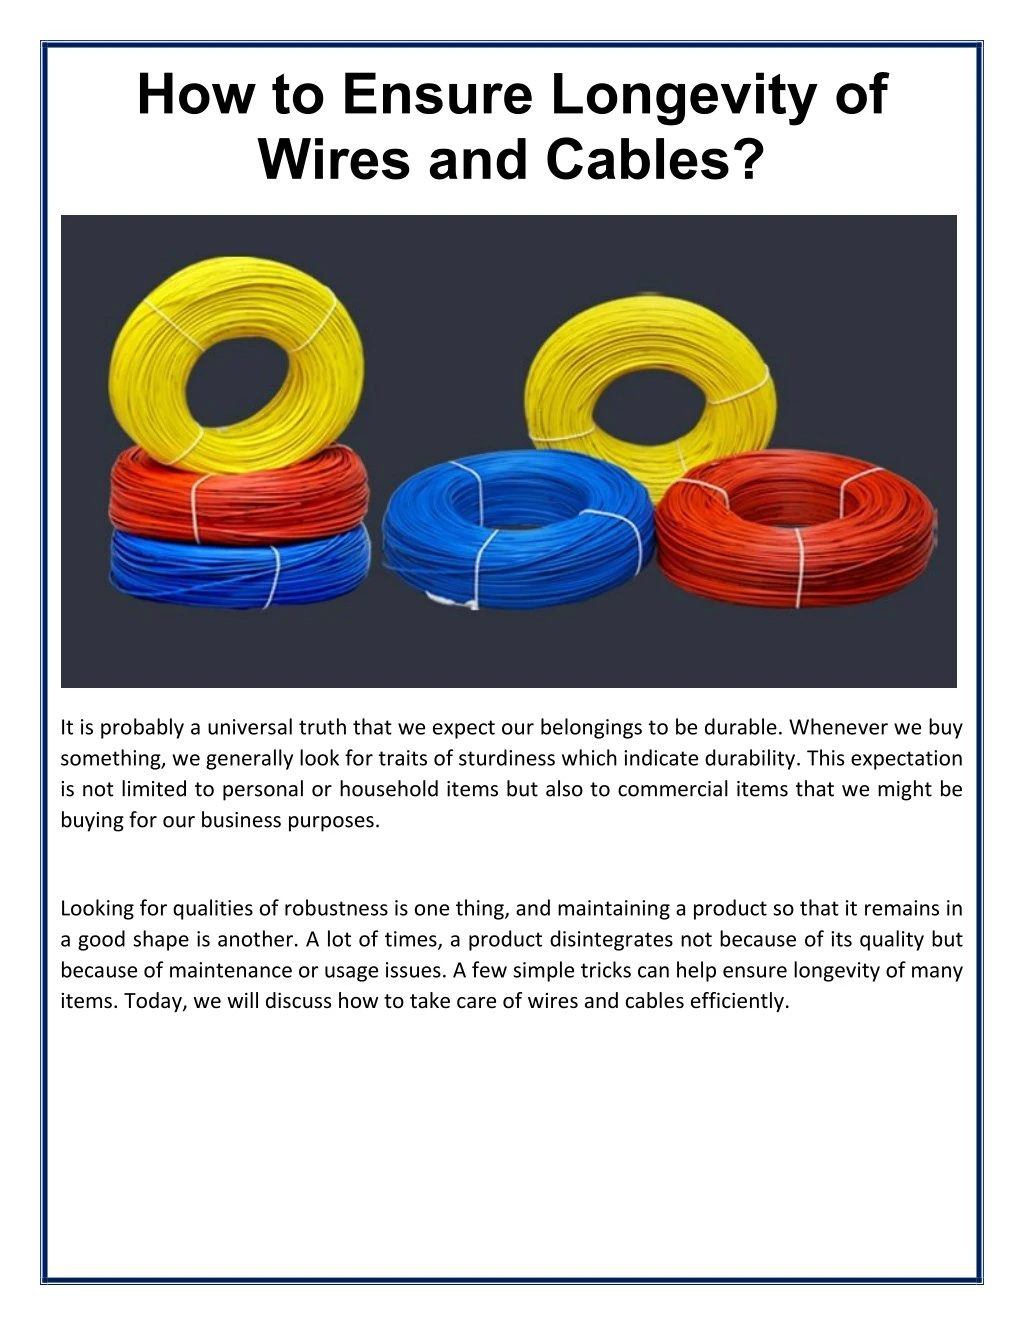 how to ensure longevity of wires and cables